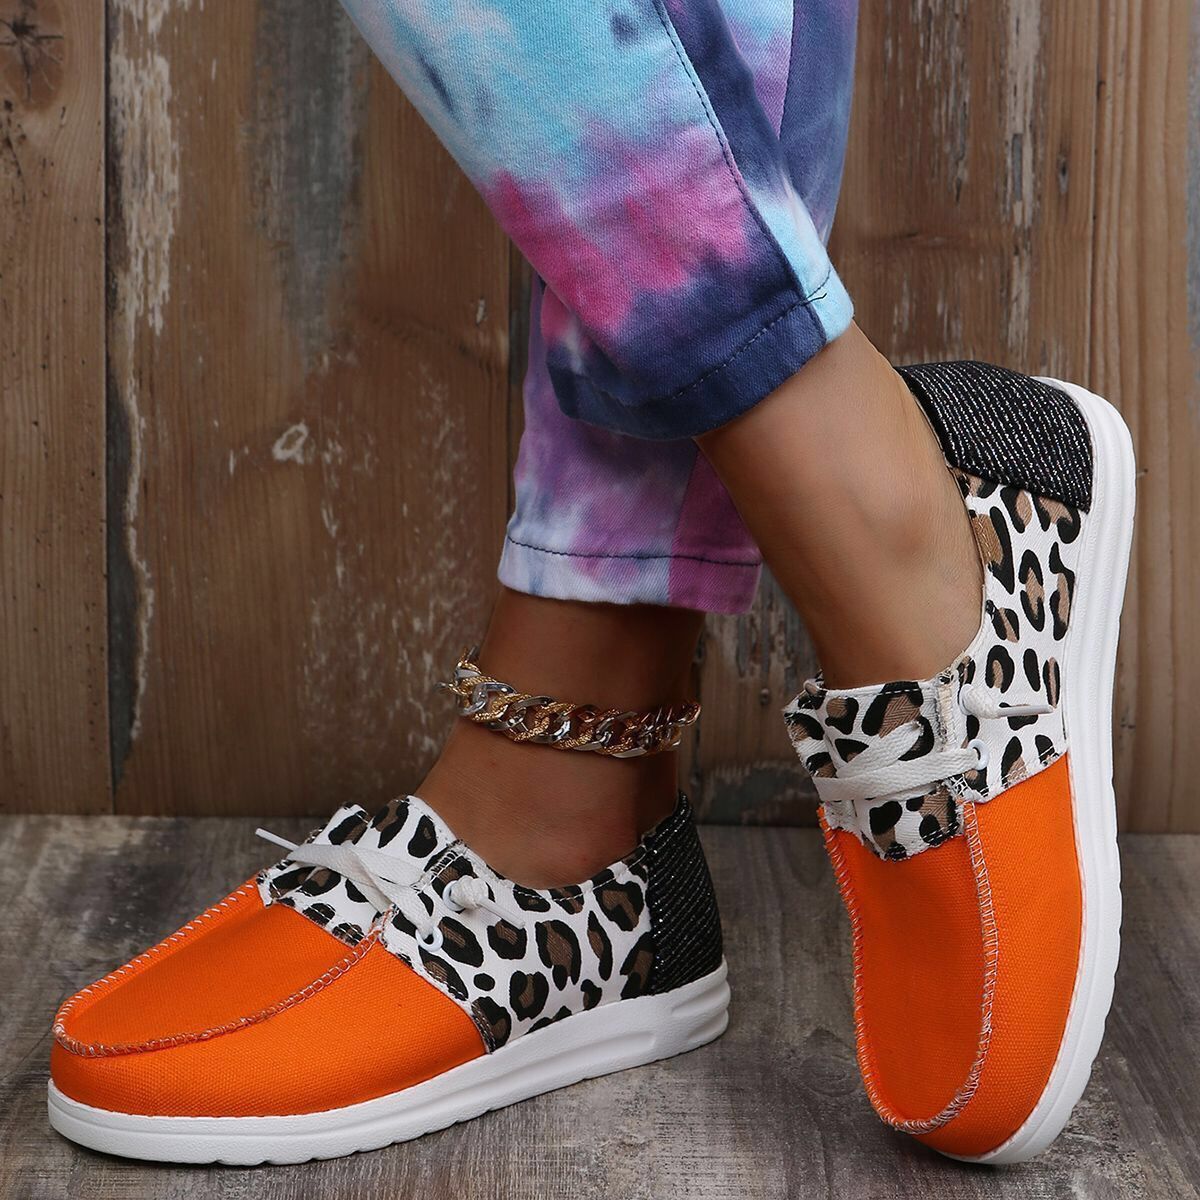 Patchwork Canvas Flats: Stylish Running and Walking Sneakers for Women